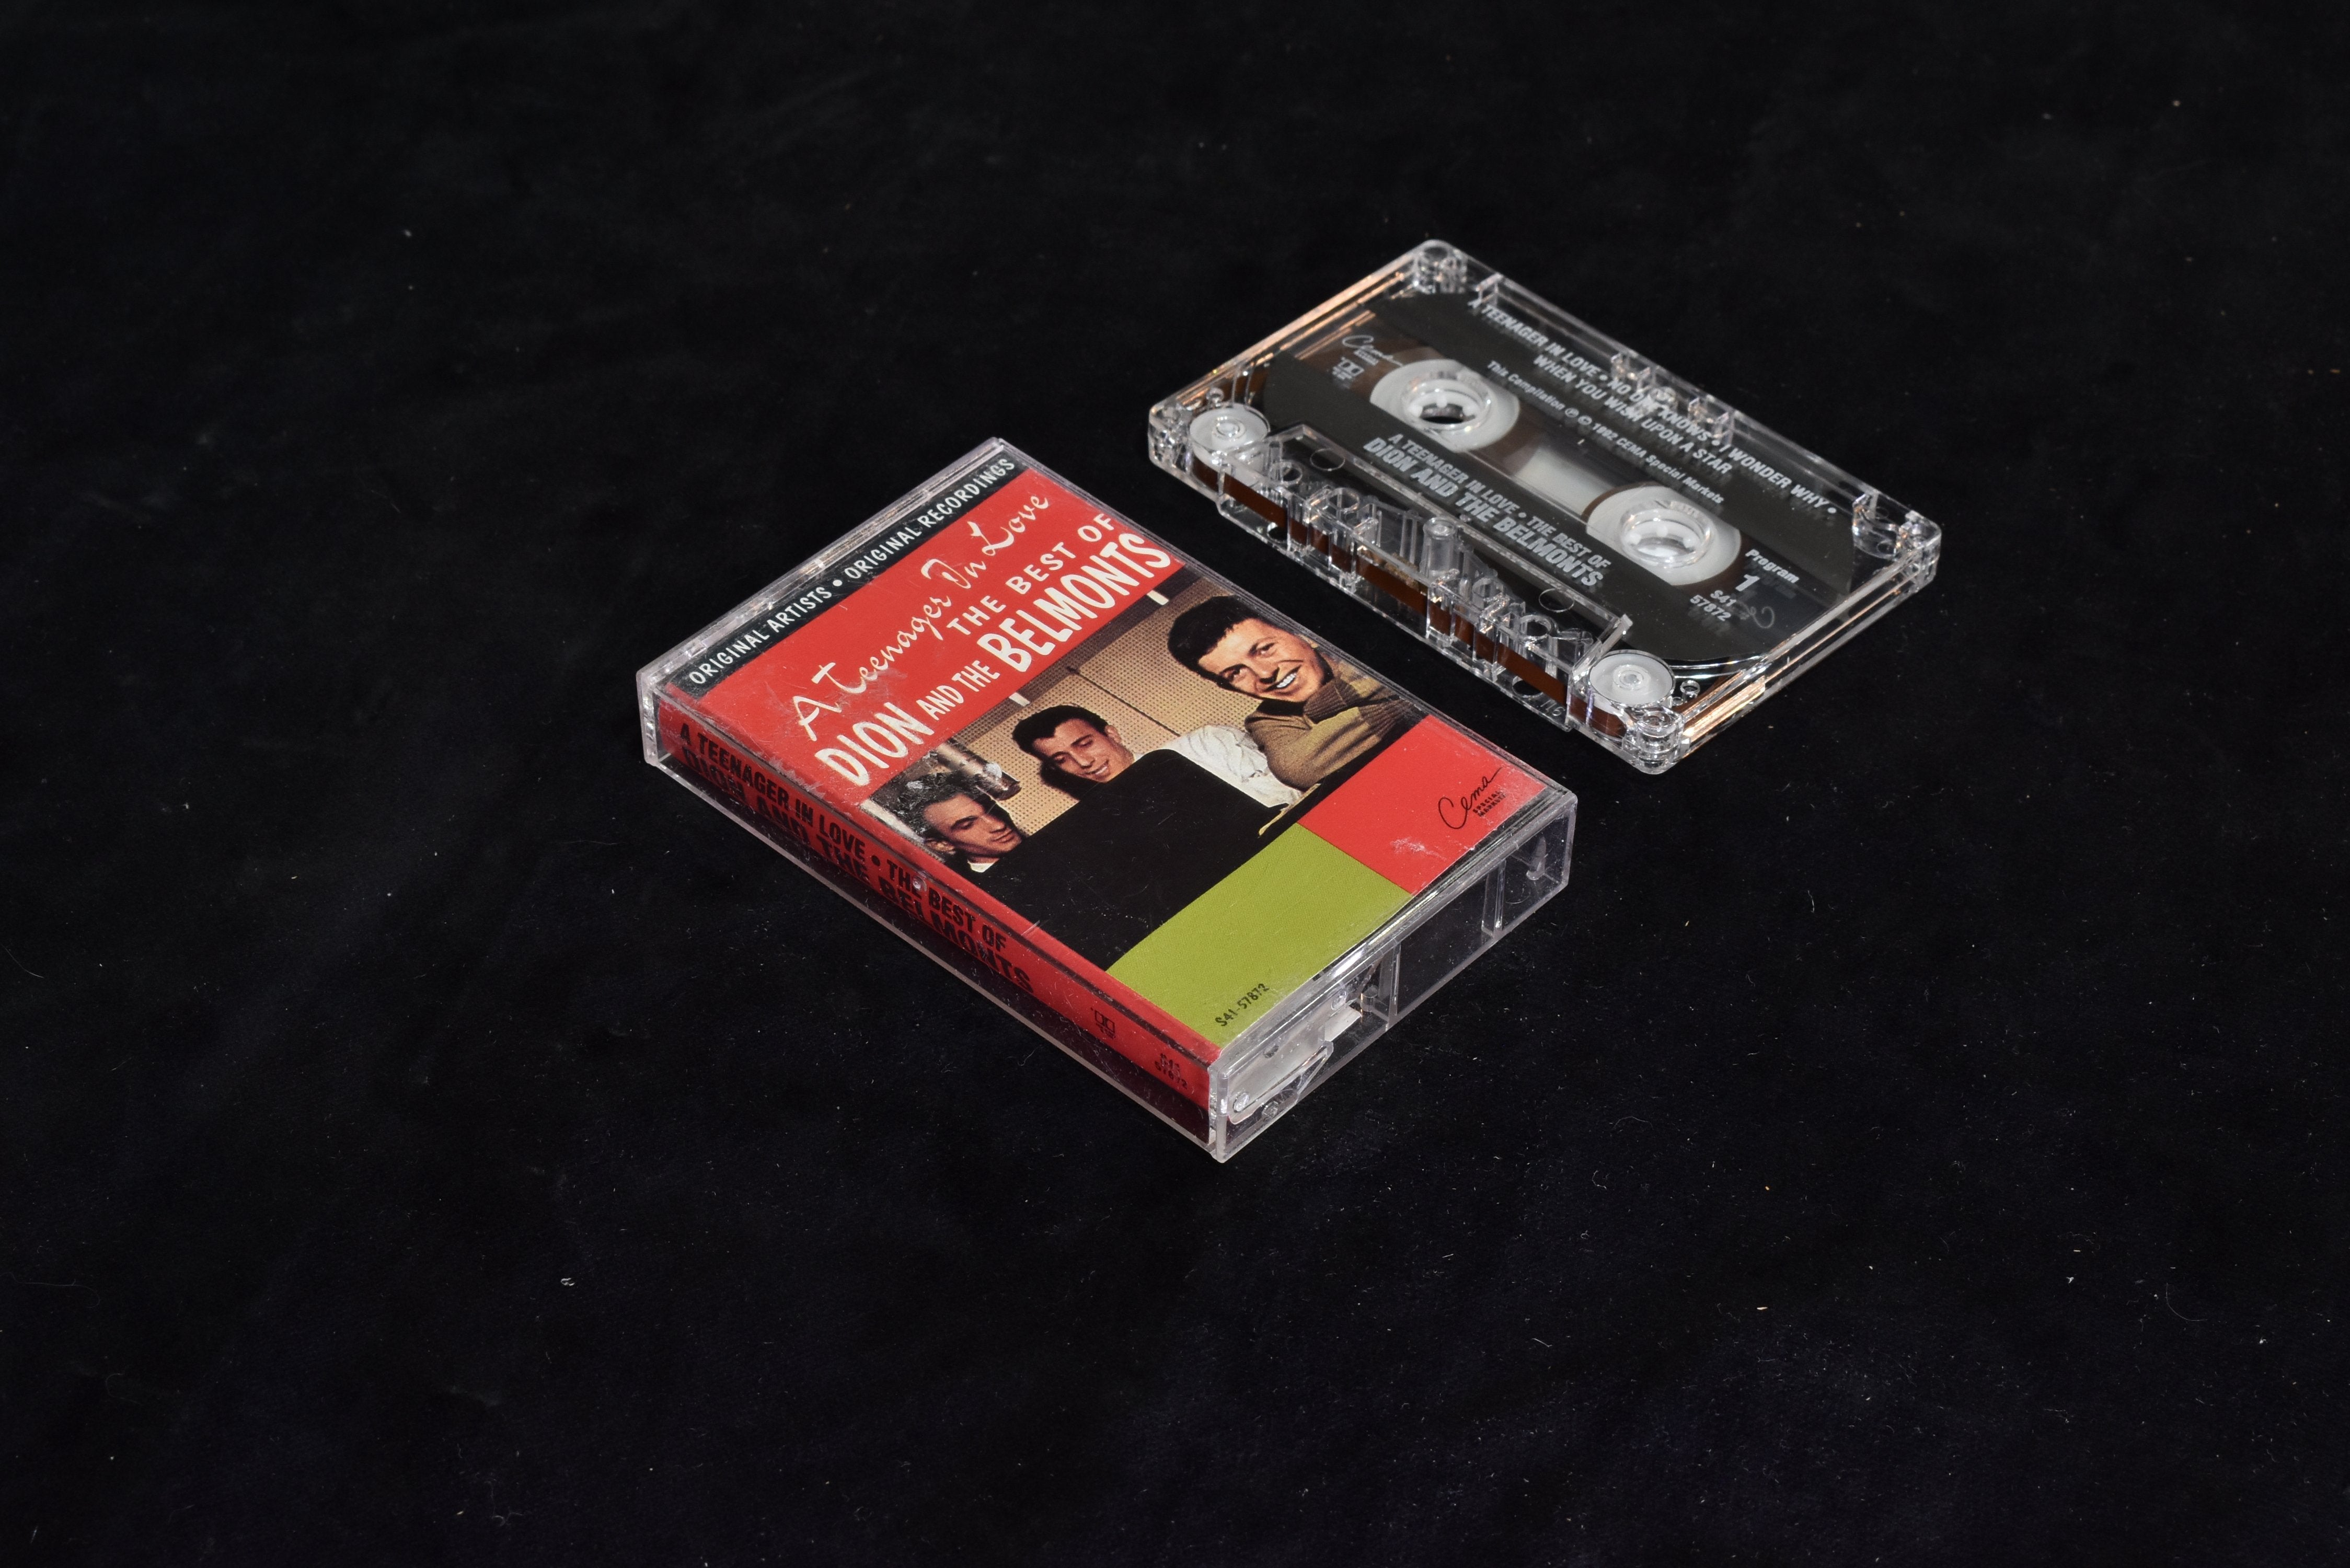 A teenager in love the Best of Dion and the Belmonts used cassette tape